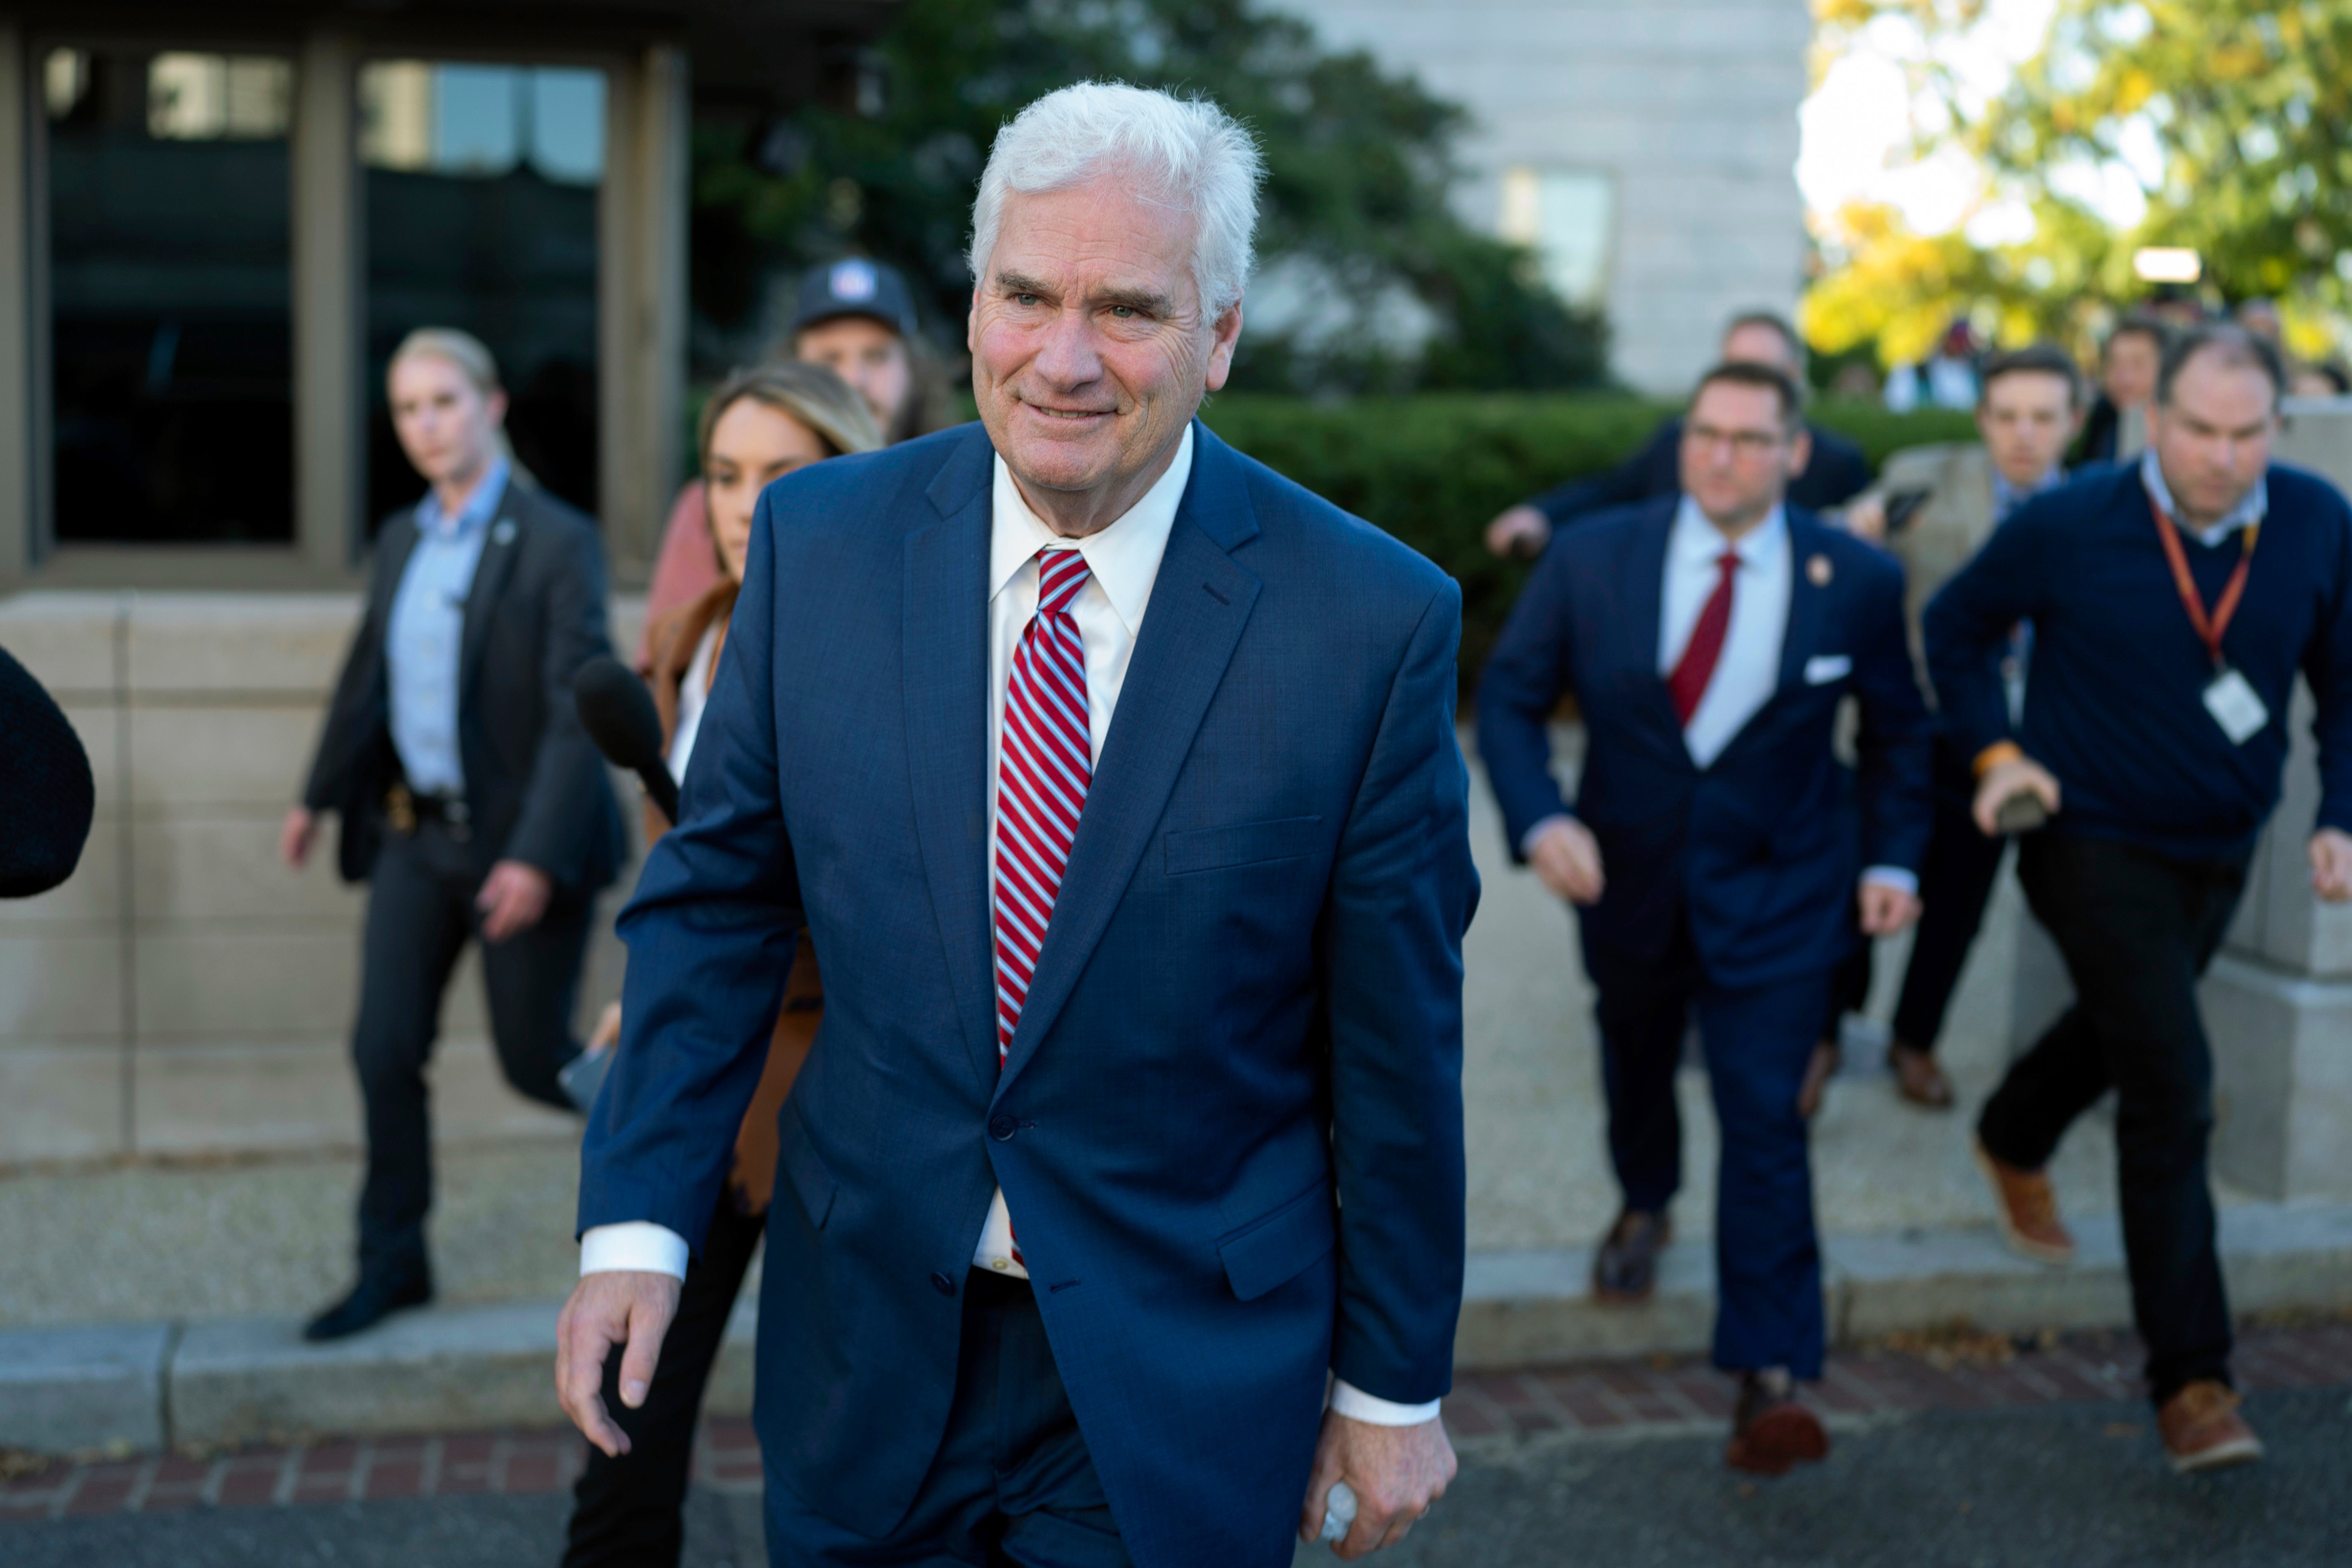 Tom Emmer’s chances were blown out of the water by the man he thought he had won over